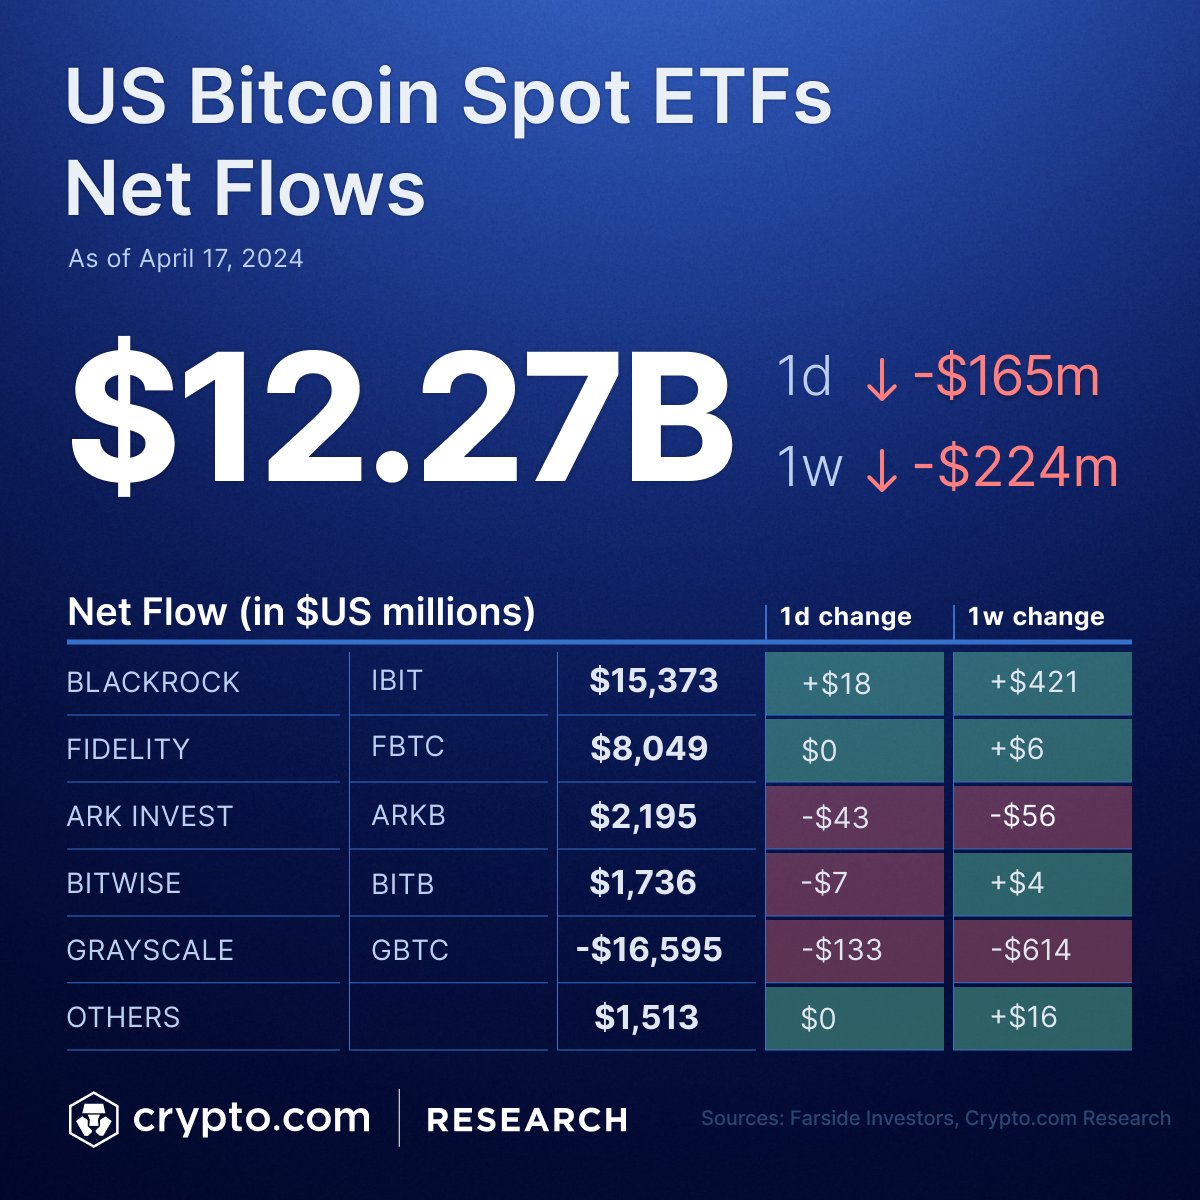 💸 Latest data shows US Spot #Bitcoin ETFs with a total net inflow of $12.27B and daily net outflow of $165M on 17 April. Blackrock’s IBIT recorded the lowest daily net inflow of $18M and Bitwise’s BITB witnessed its first outflow since launch.